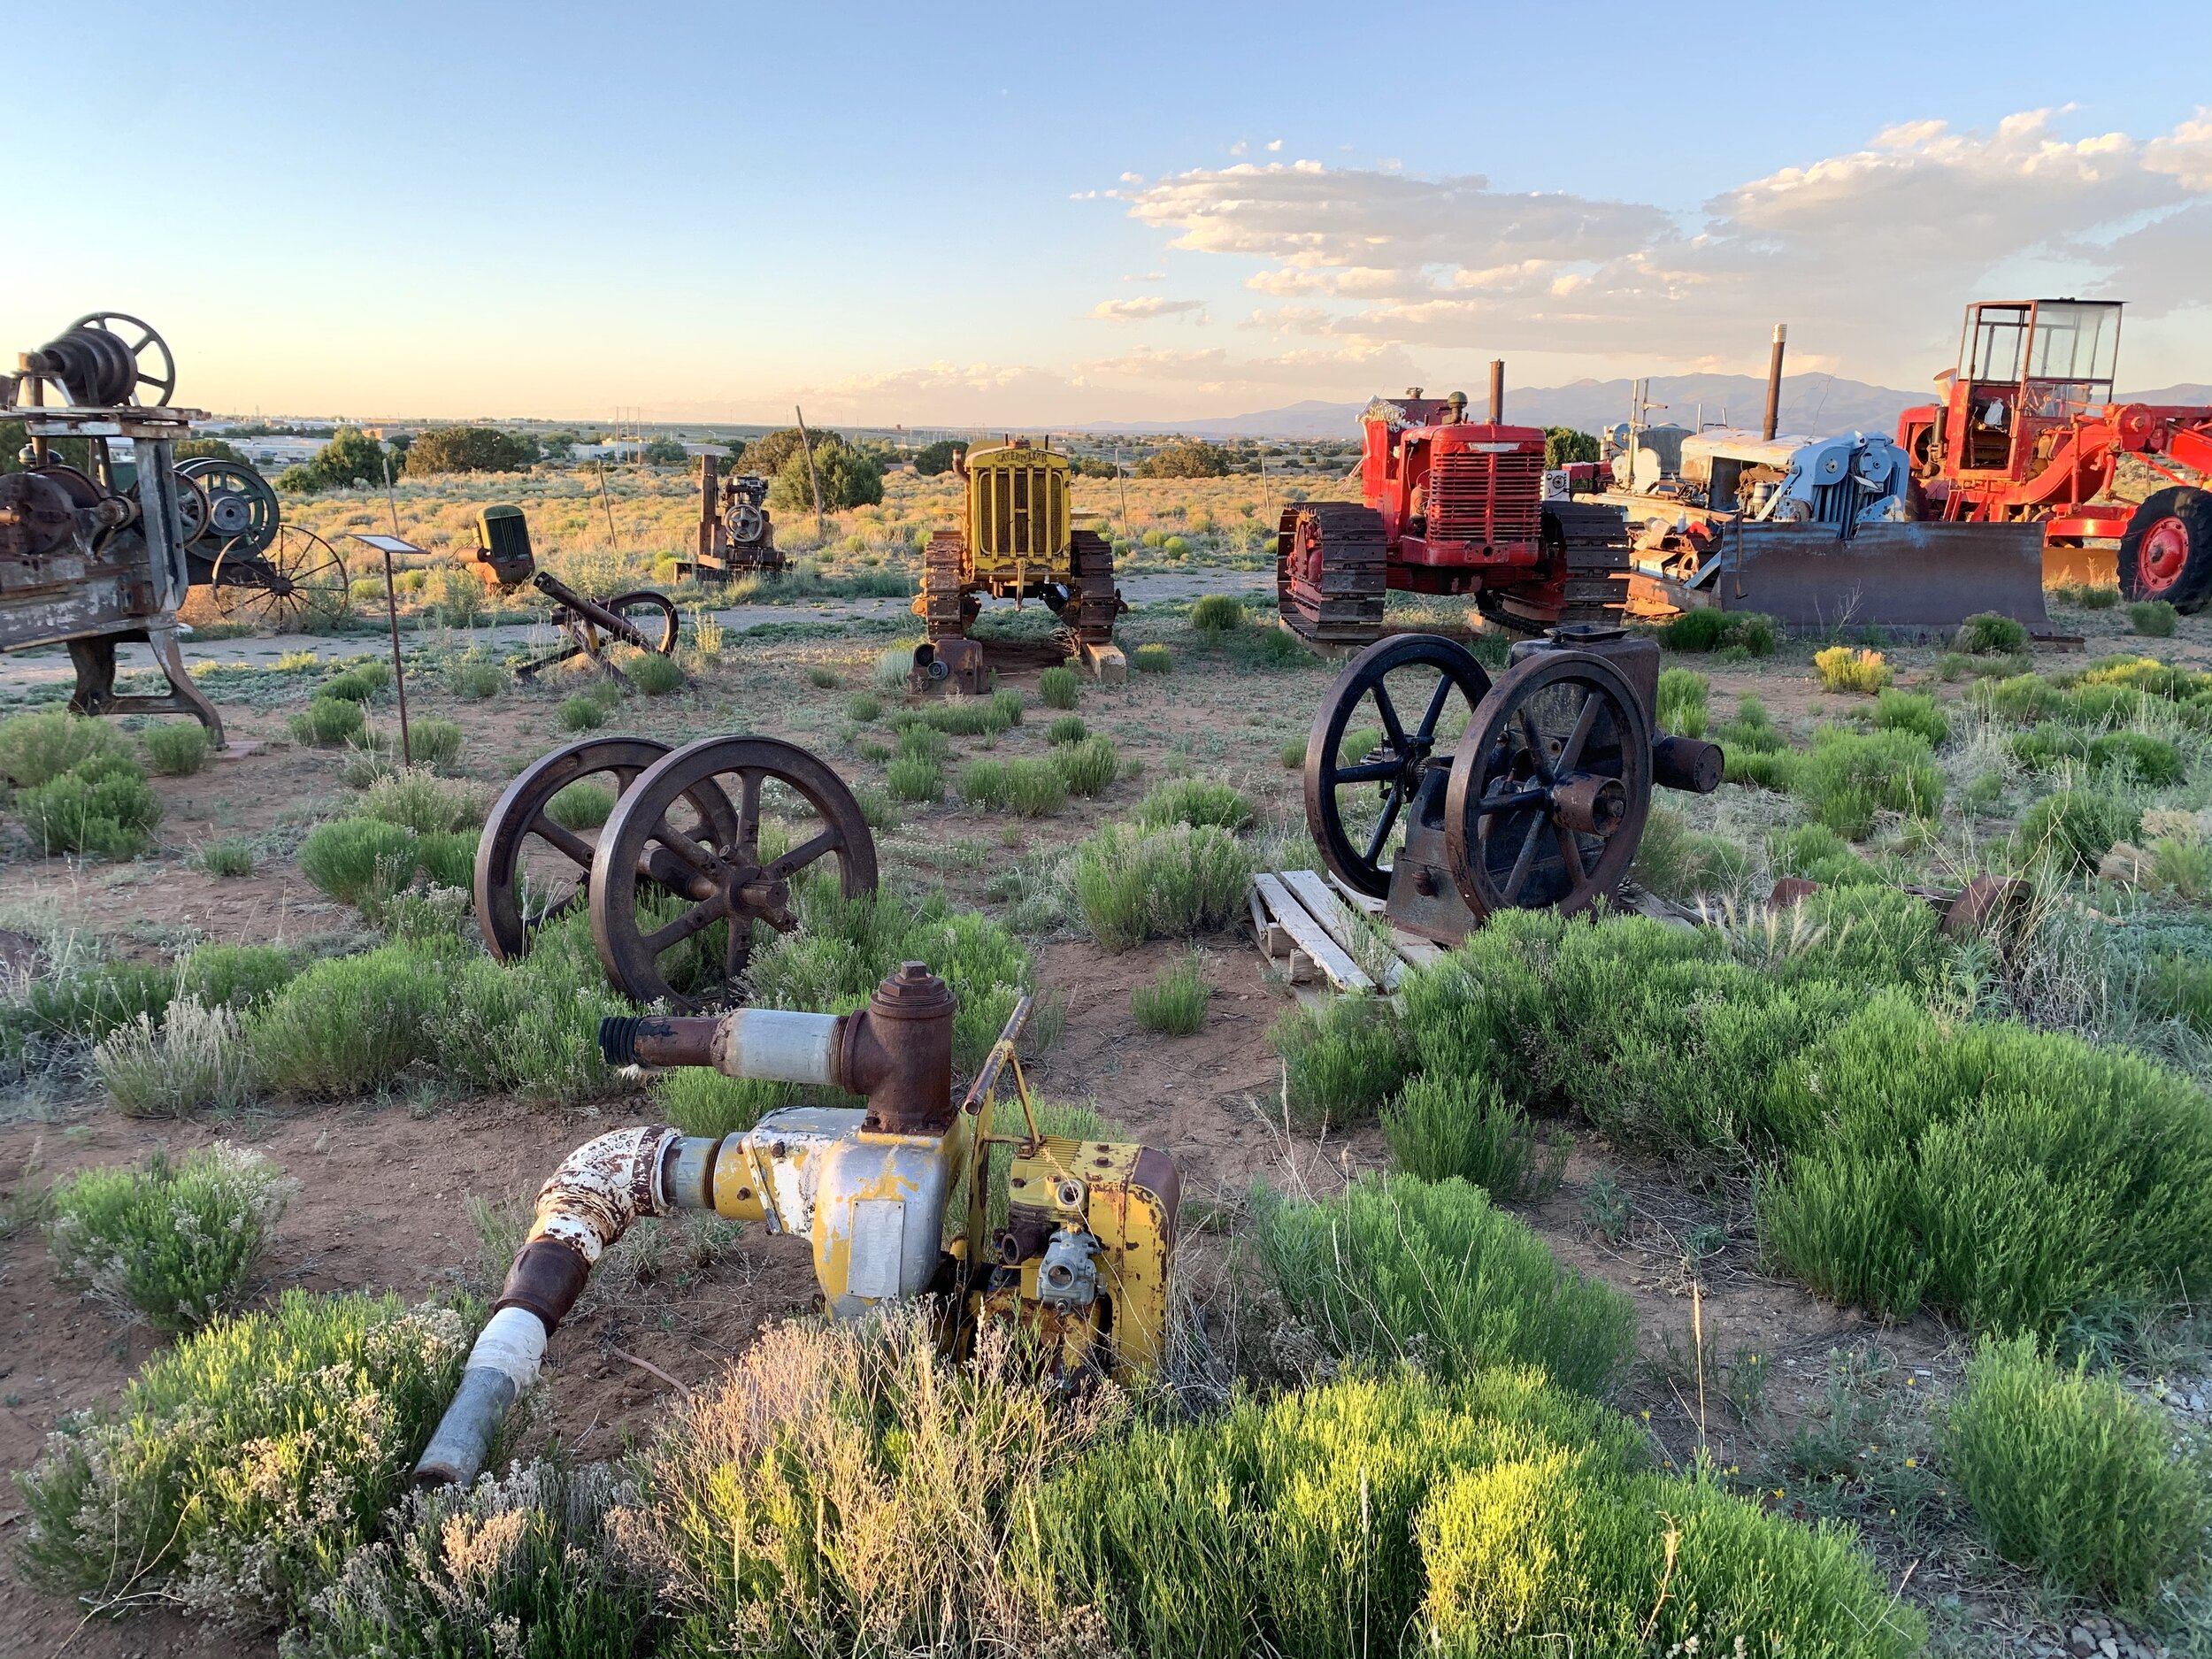  Even our RV Park owner had a hobby of collecting modern art and old vehicles and machinery. The machinery was the park's theme with all types of antiques scattered around the grounds, mixed in with modern art. It certainly went with the Santa Fe vib